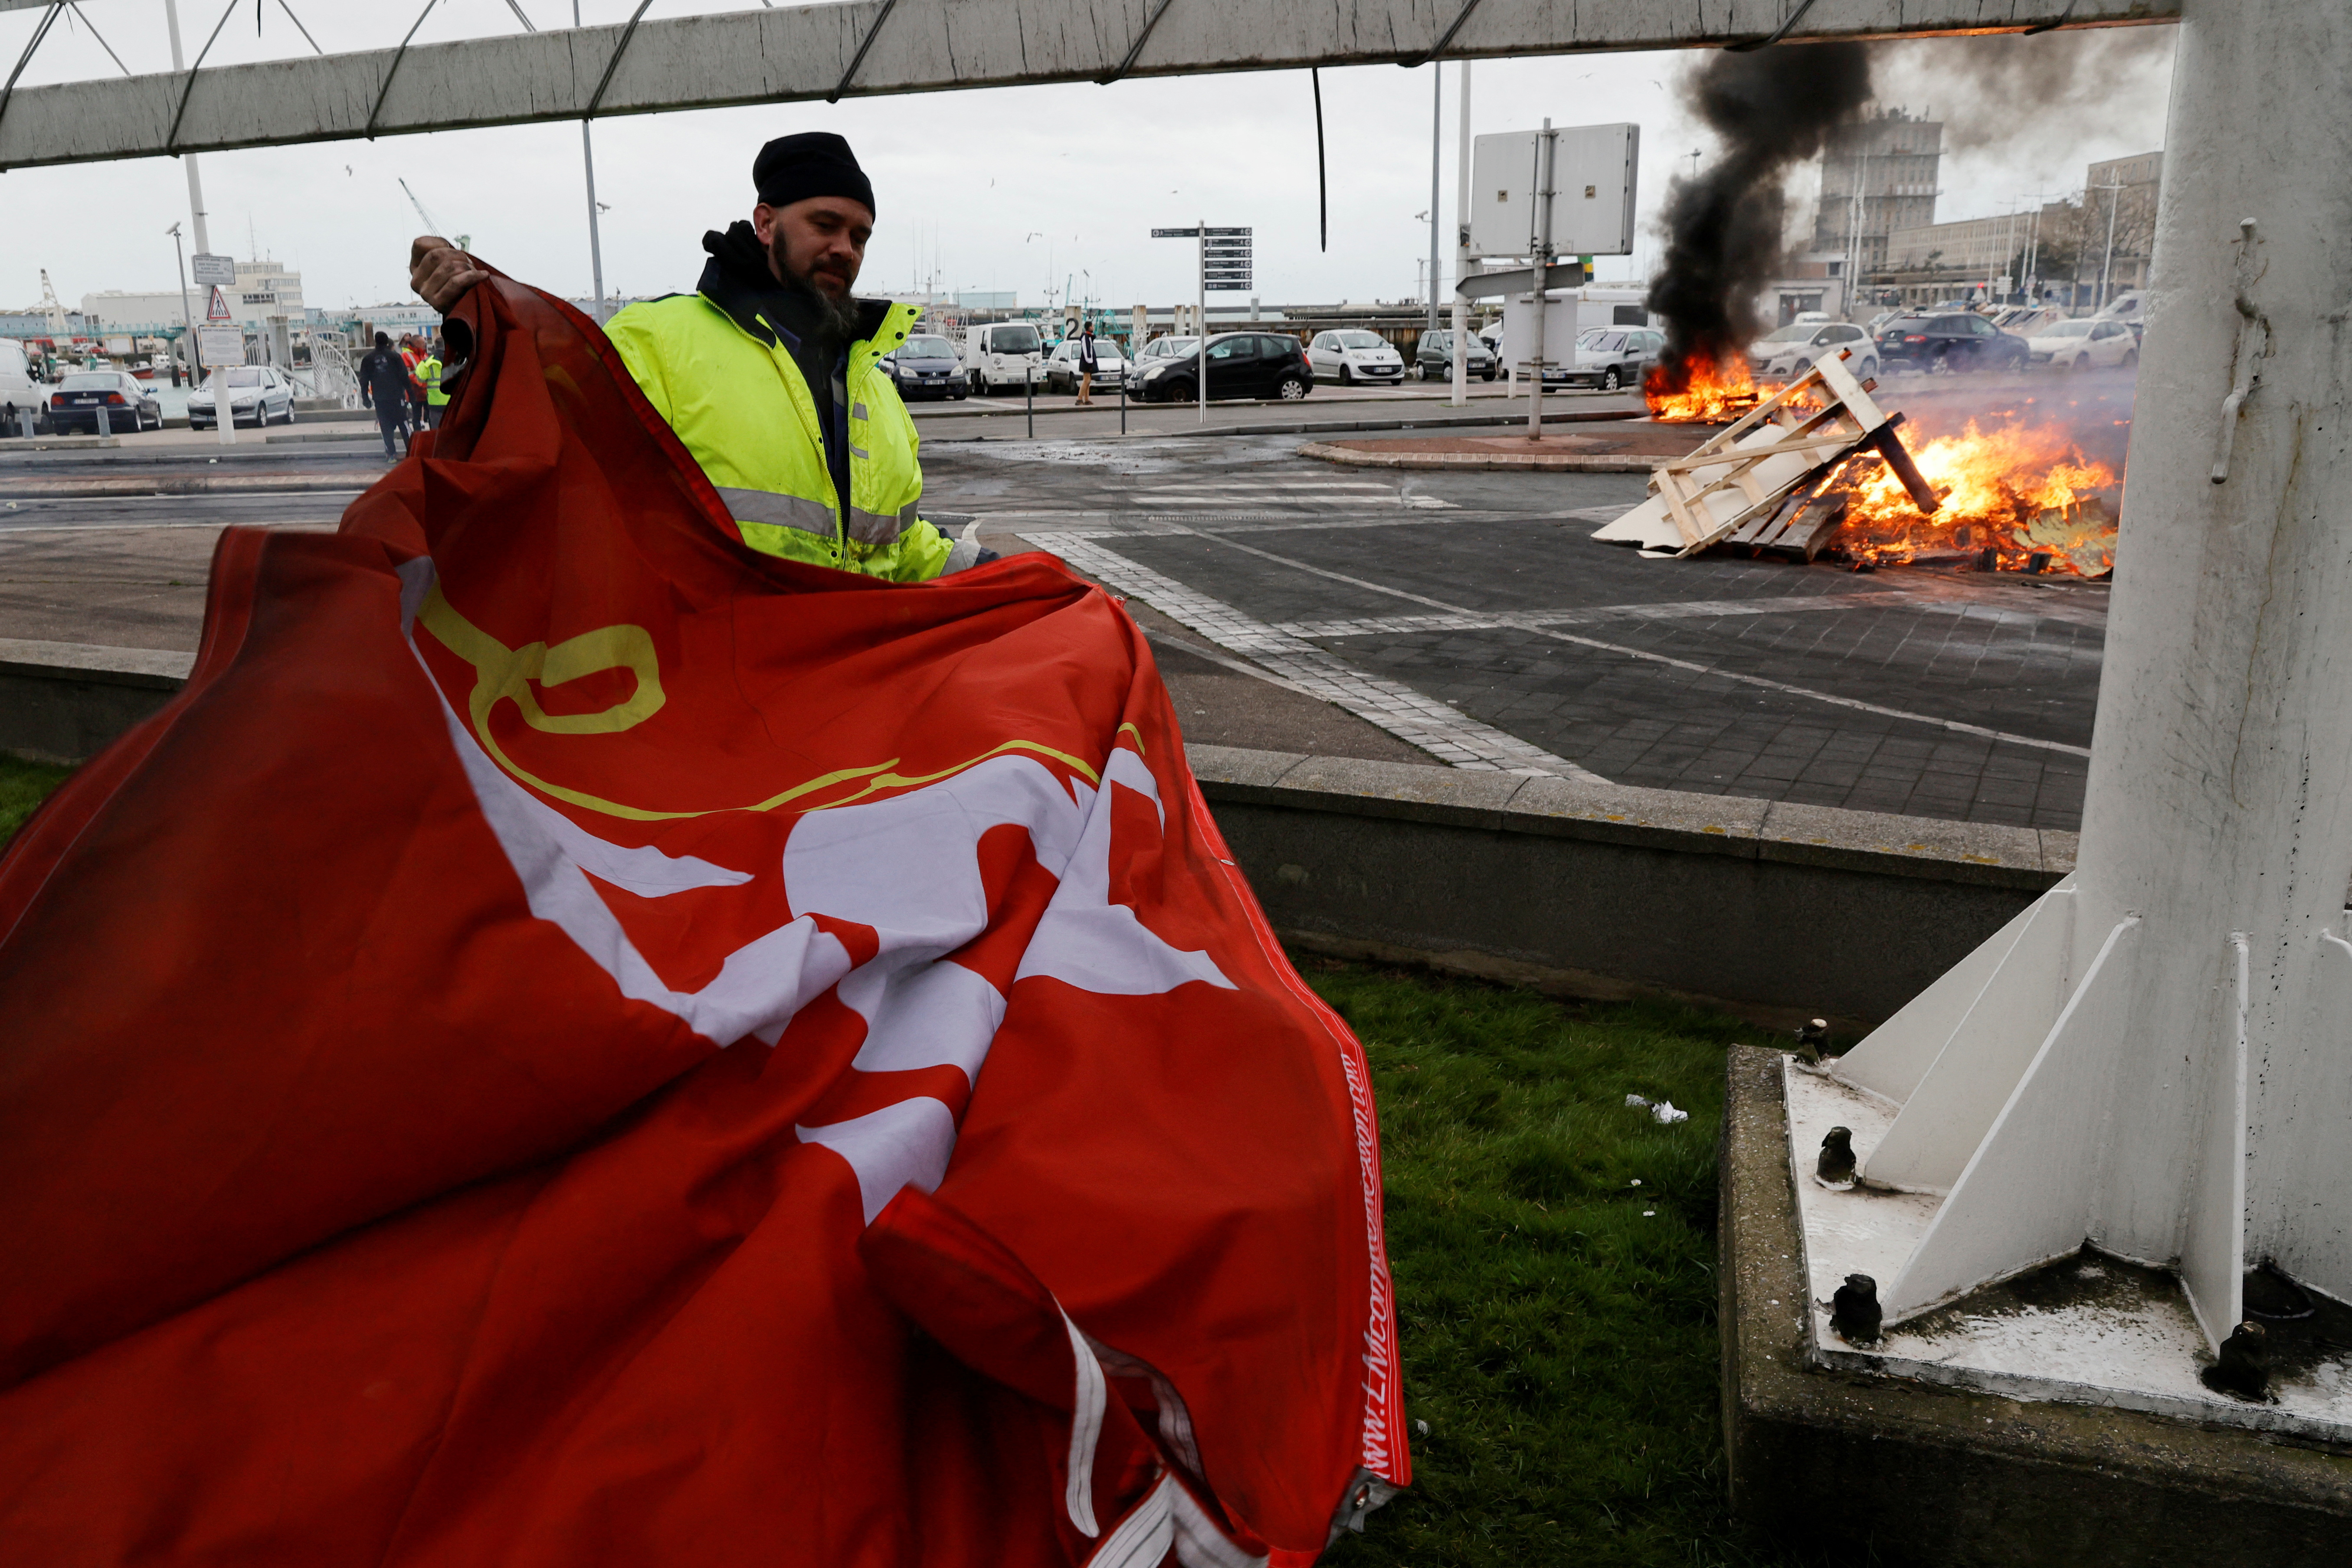 Port workers on strike protest pension reform in Le Havre